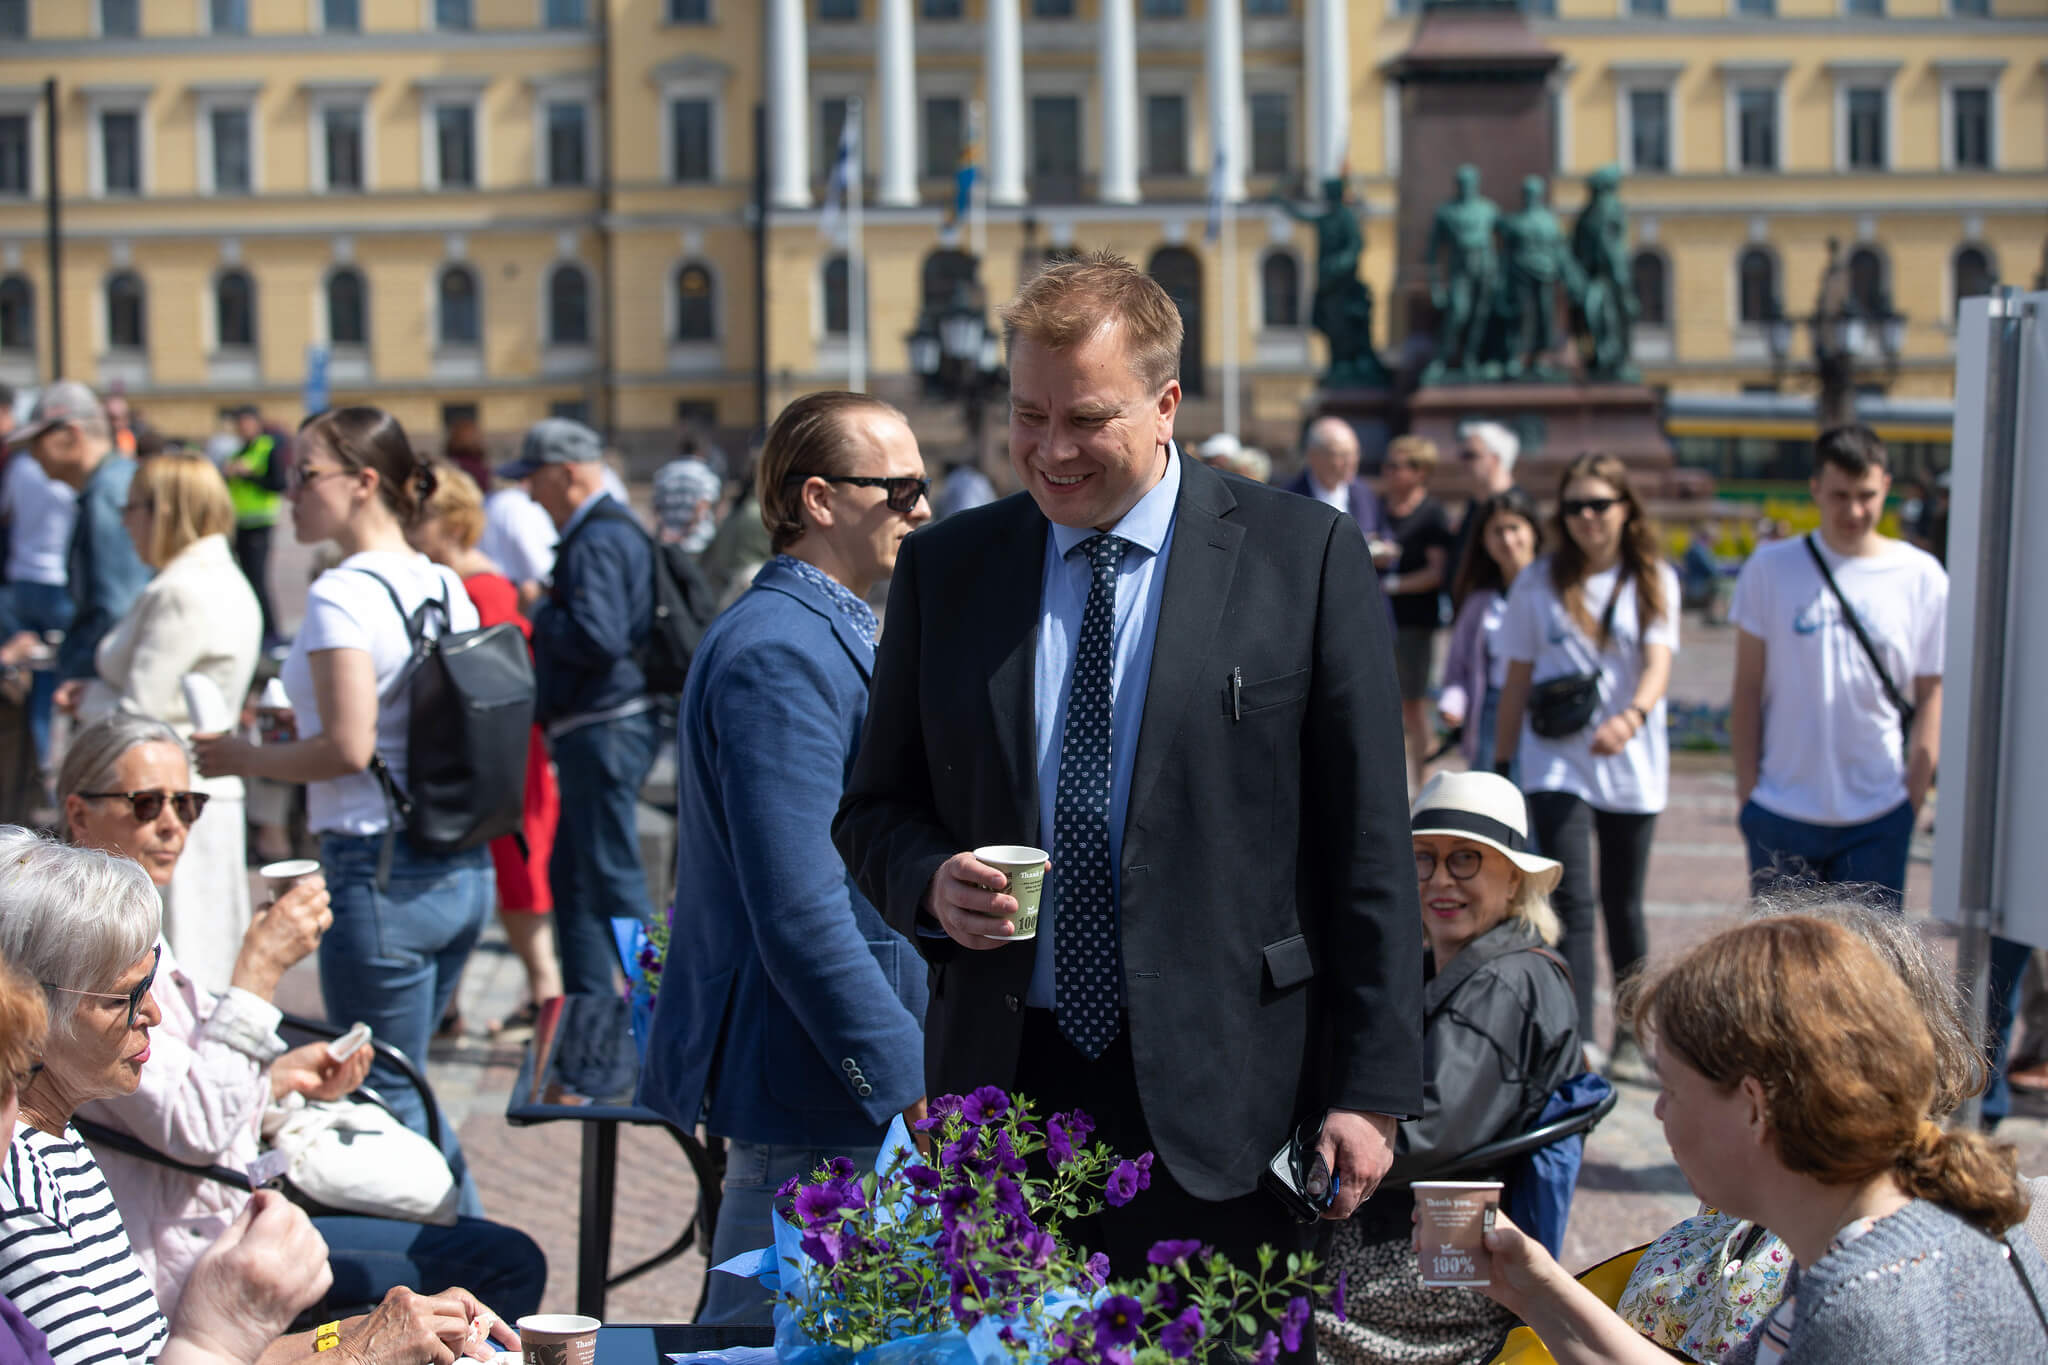 The Finnish Minister of Defence drinks coffee in a city square.